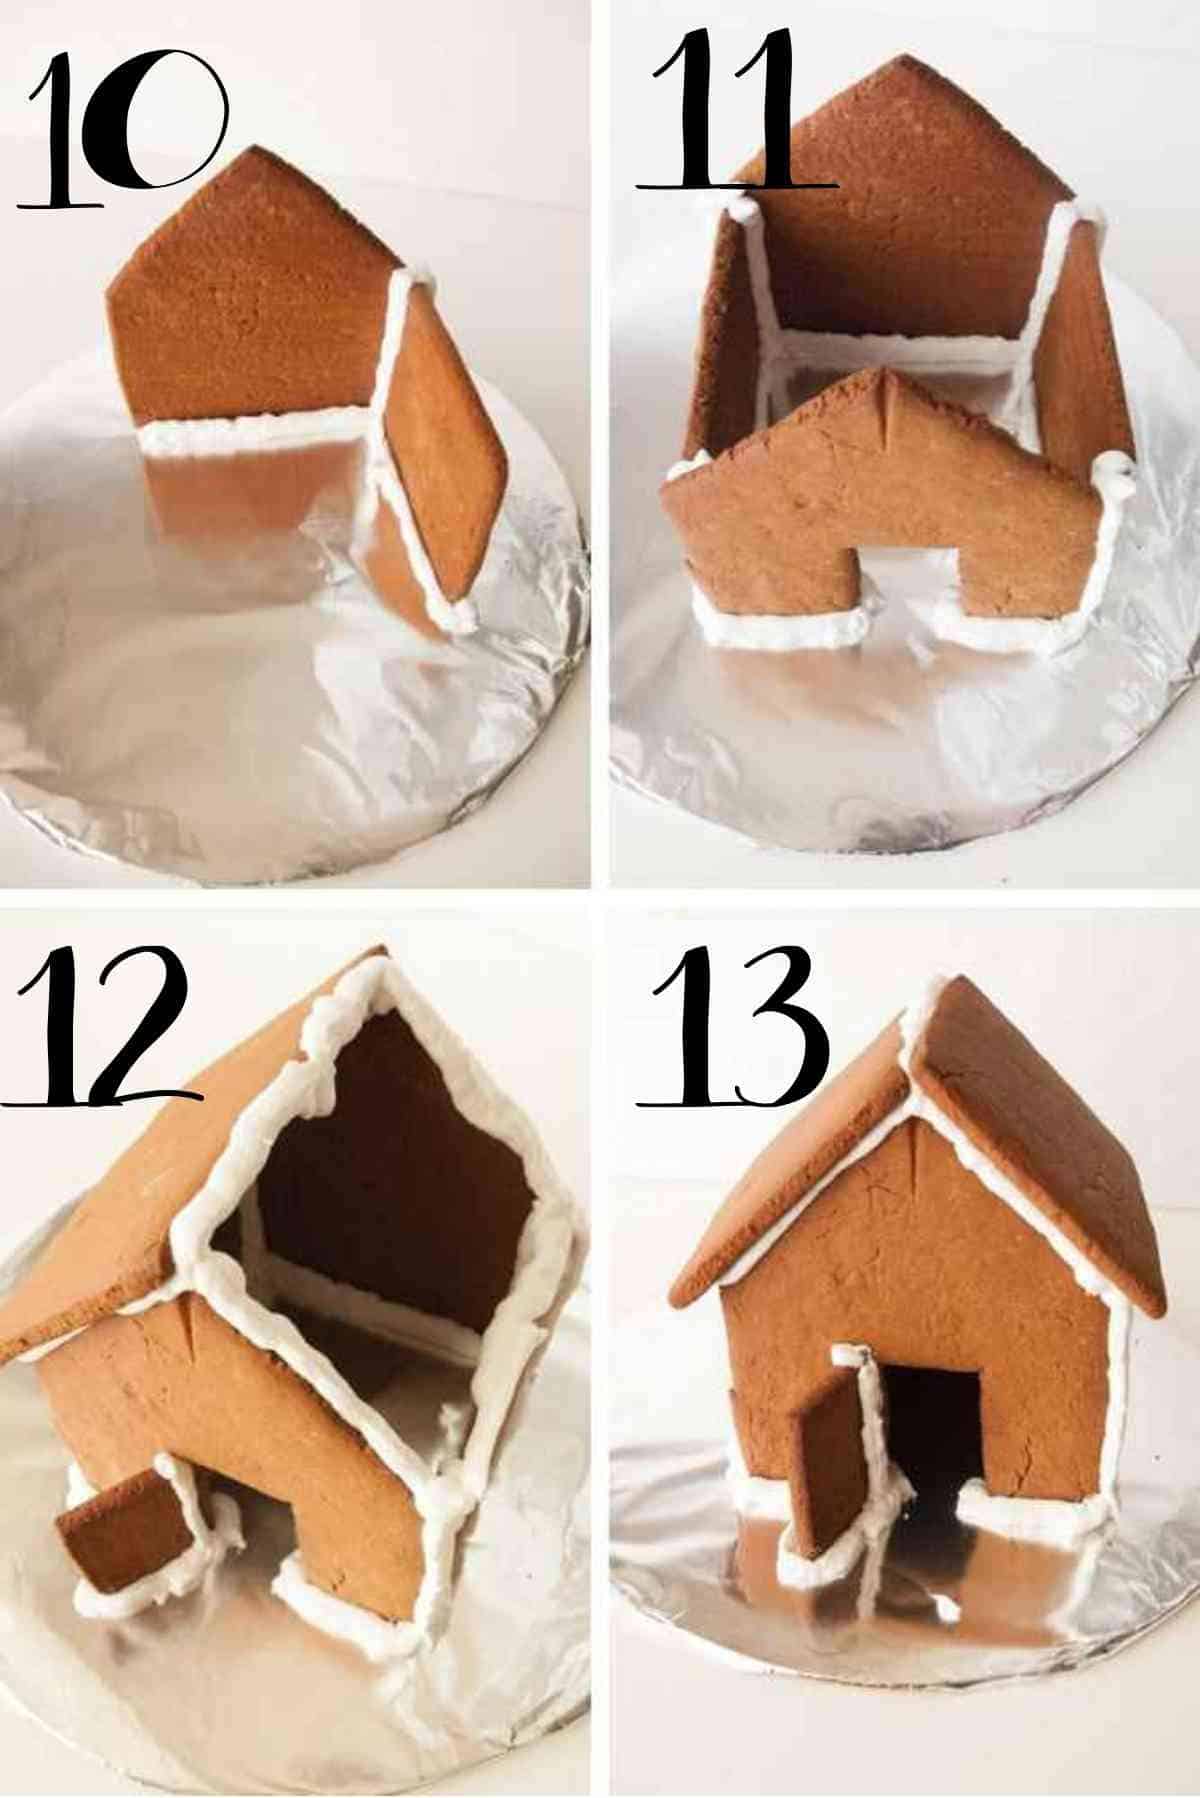 How to assemble your real gingerbread house!